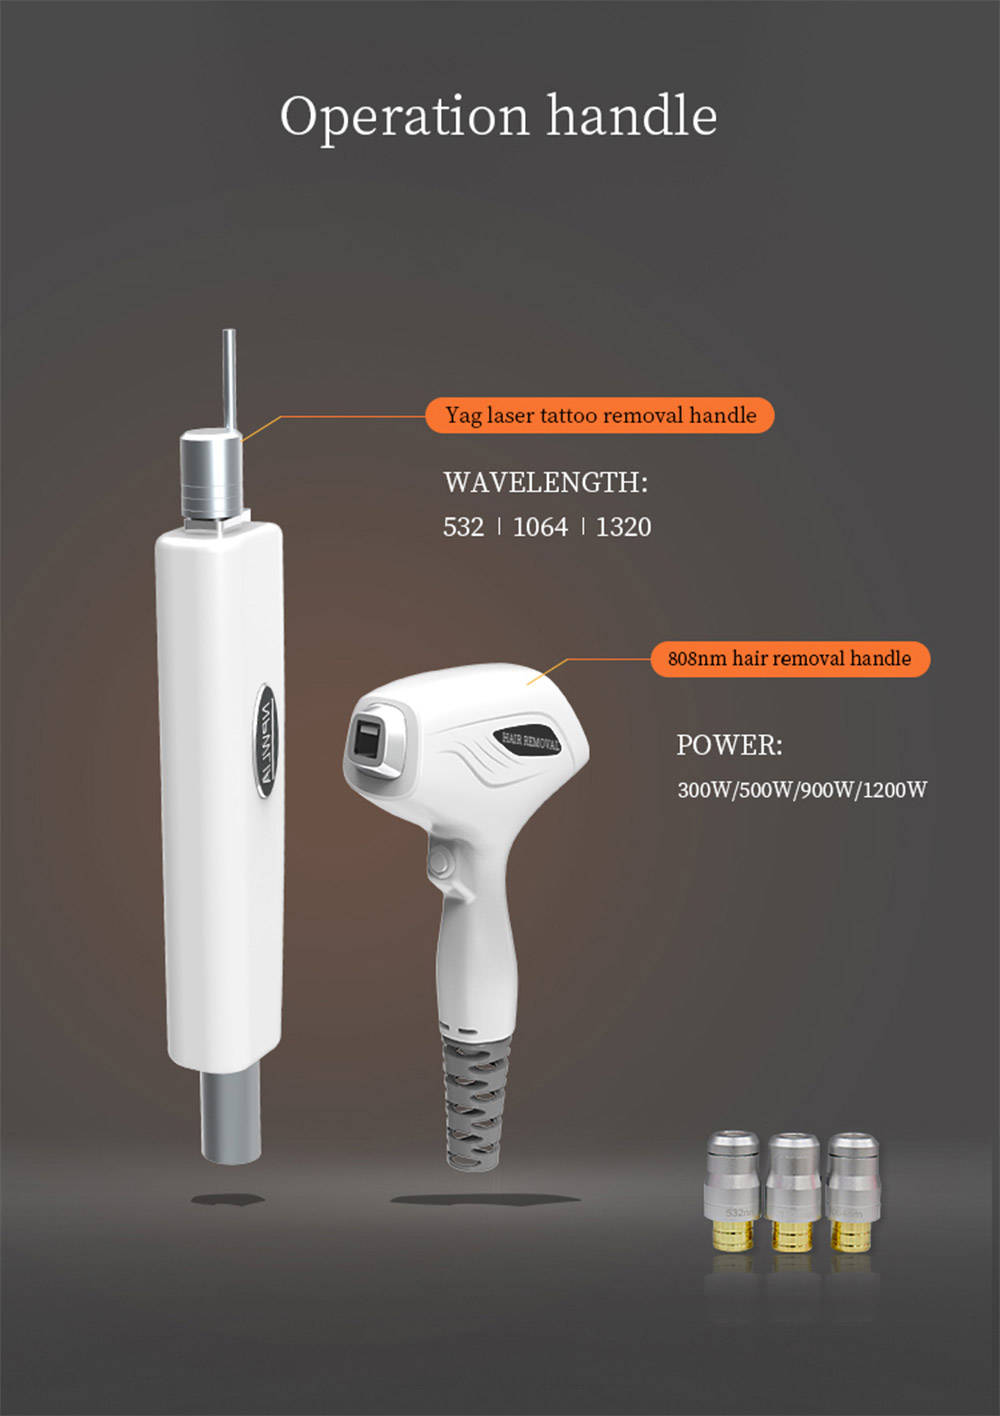 Portable Diode Laser + ND YAG Laser 2 In 1 Multifunctional Beauty Machine